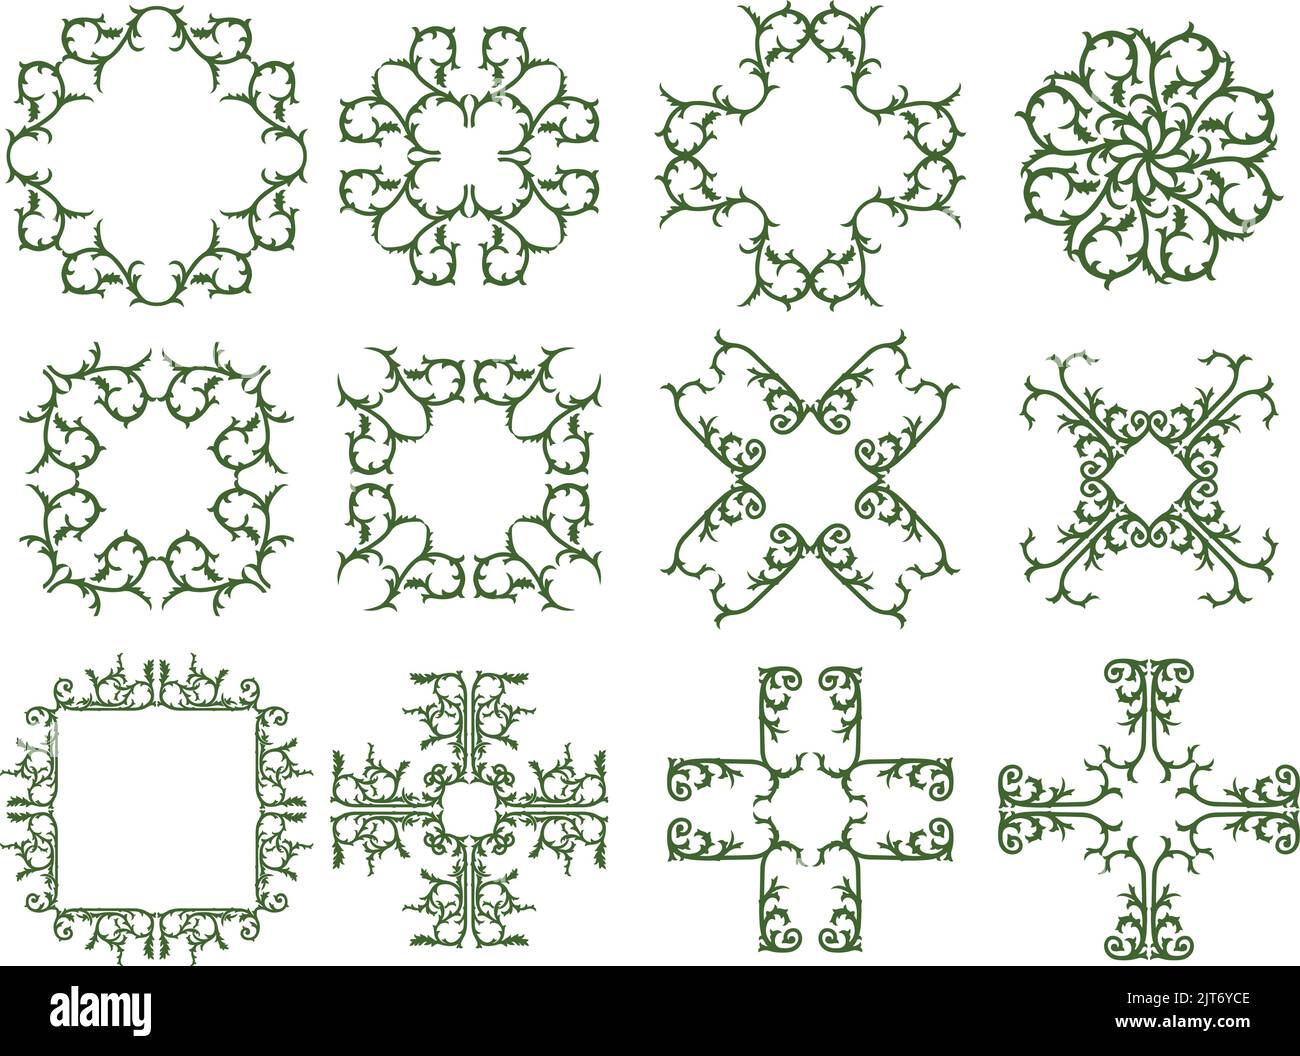 A set of vintage vector decorative floral thorny borders and frames. Stock Vector